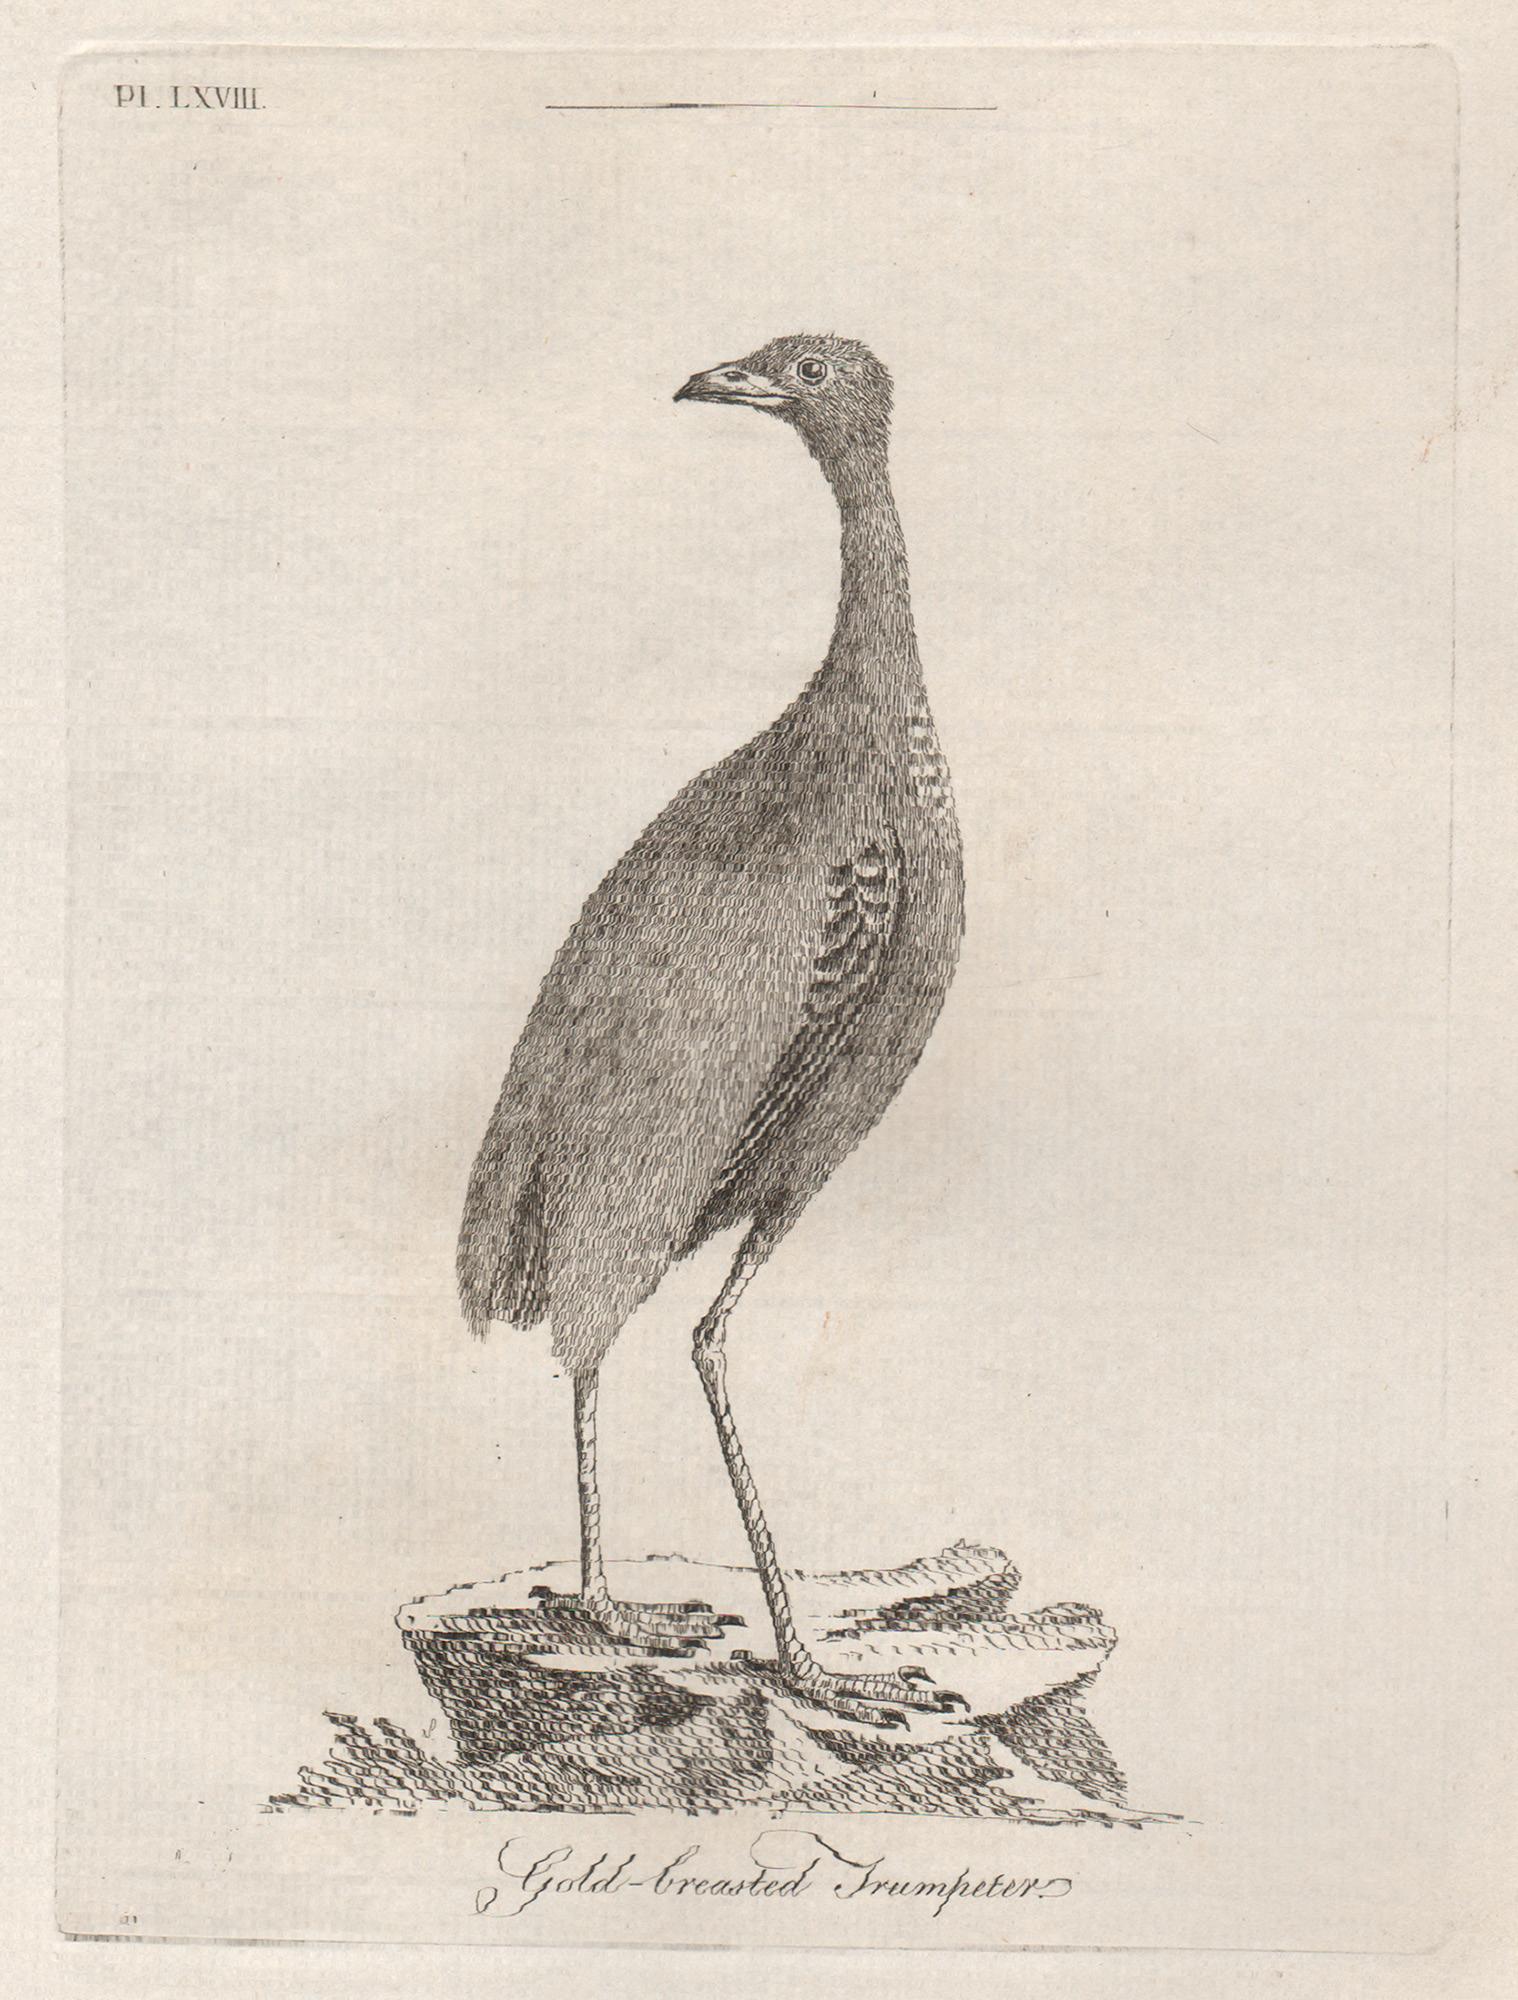 Gold-breasted Trumpeter, 18th century bird engraving by John Latham